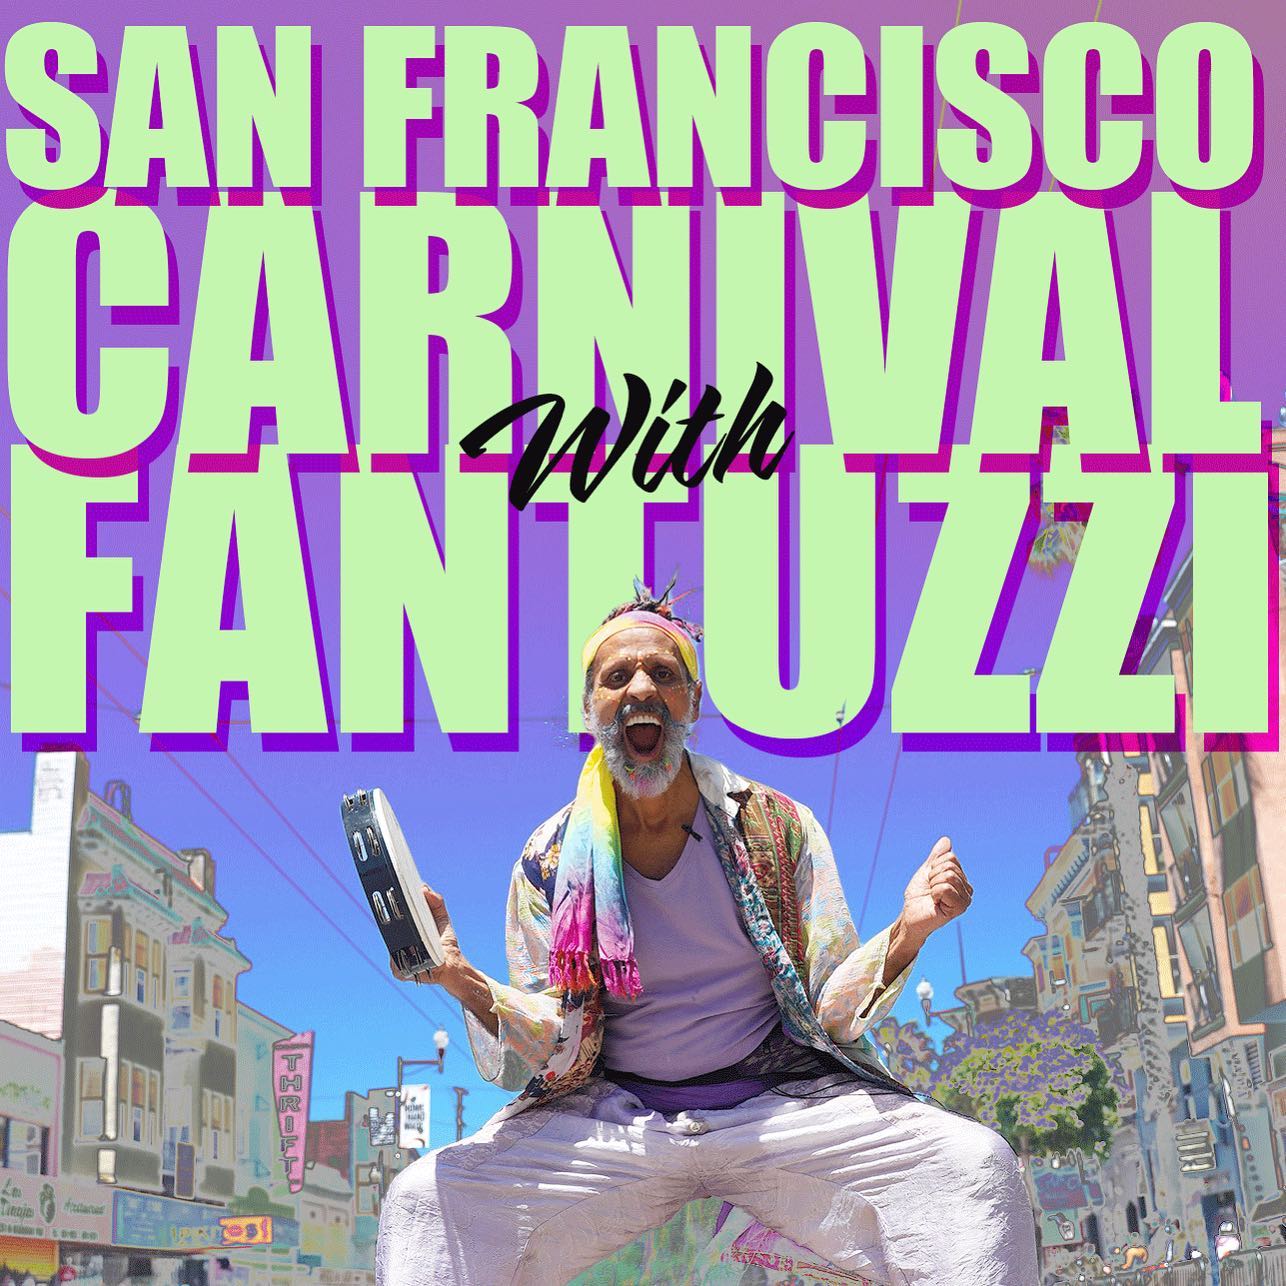 We was out here doing the most 🎉🚀🏆 @fantuzzi_music @fantauzzi_brothers (For the full video hit me) #FistUpTv #FantauzziBrothers #SFcarnival #SFcarnival2022 #sanfranciscocarnaval #bacanal #nobehavior